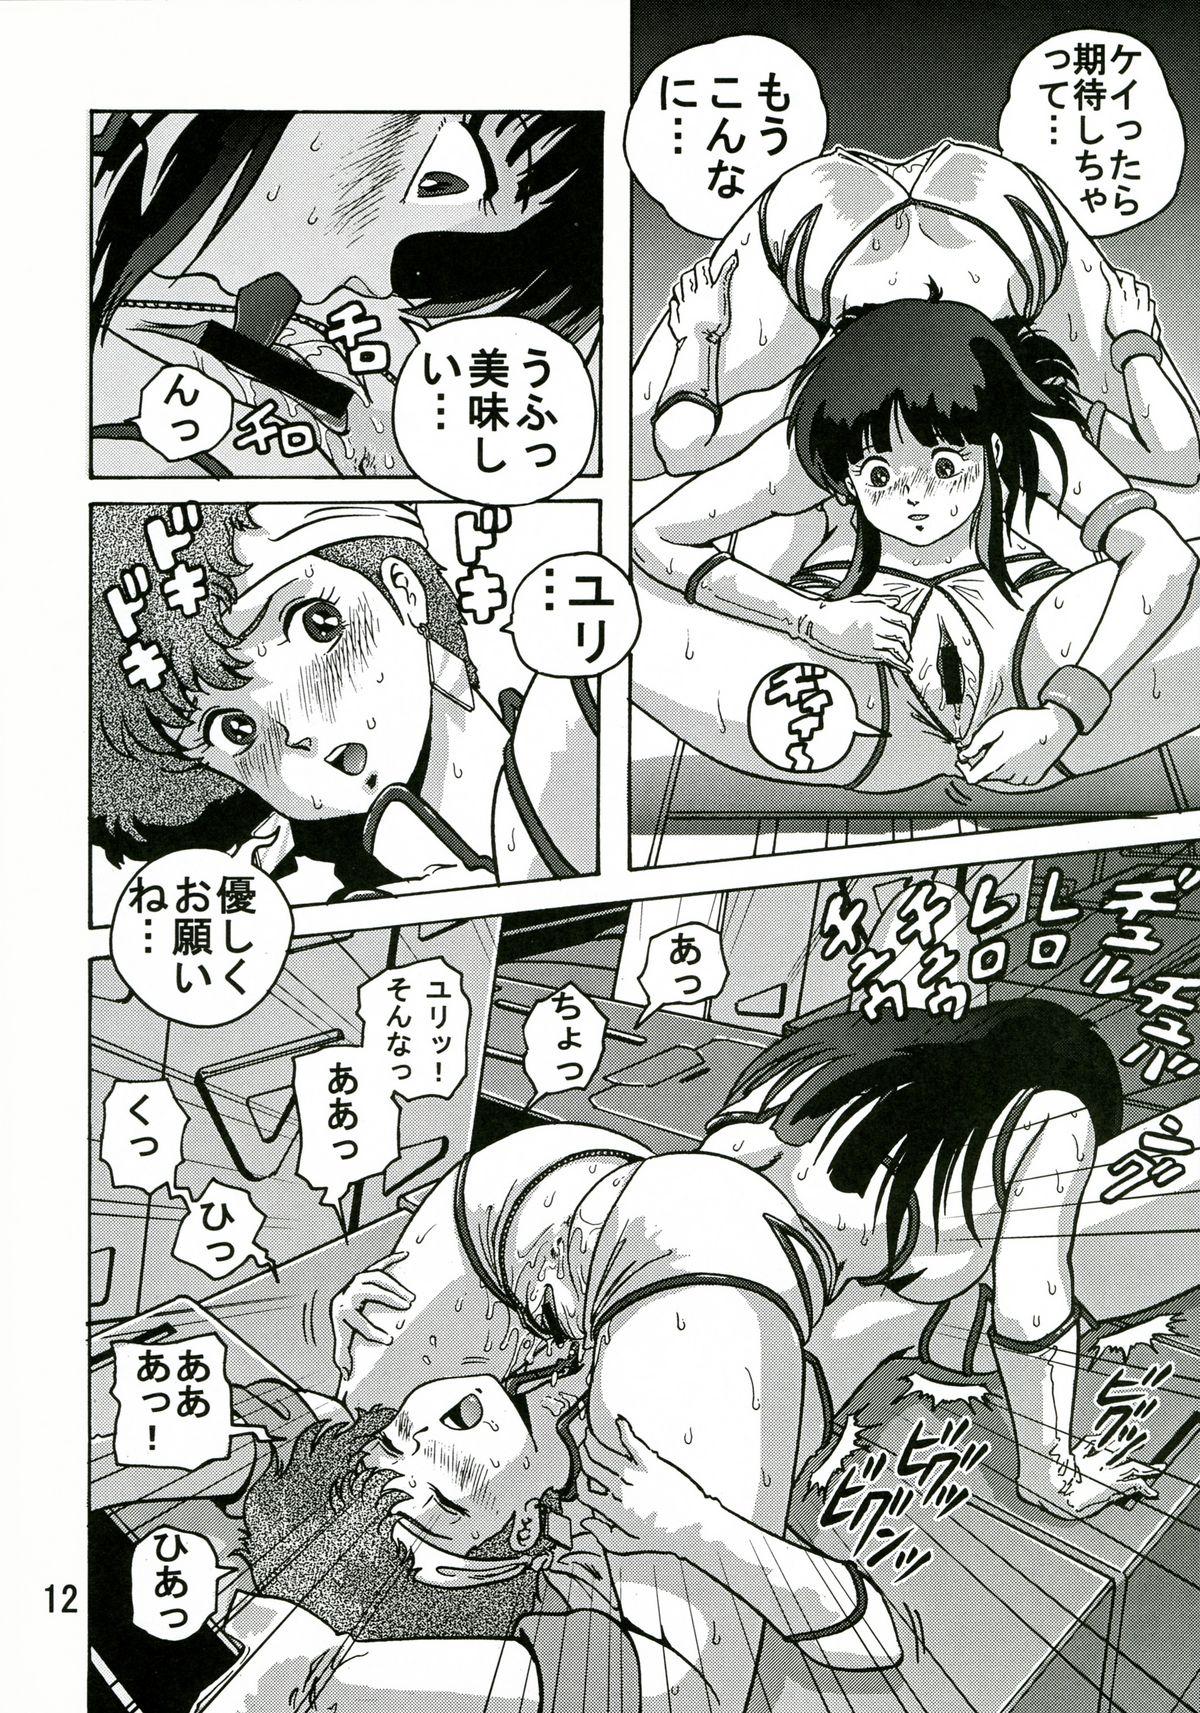 Group Love Angel 2 - Dirty pair Daddy - Page 11